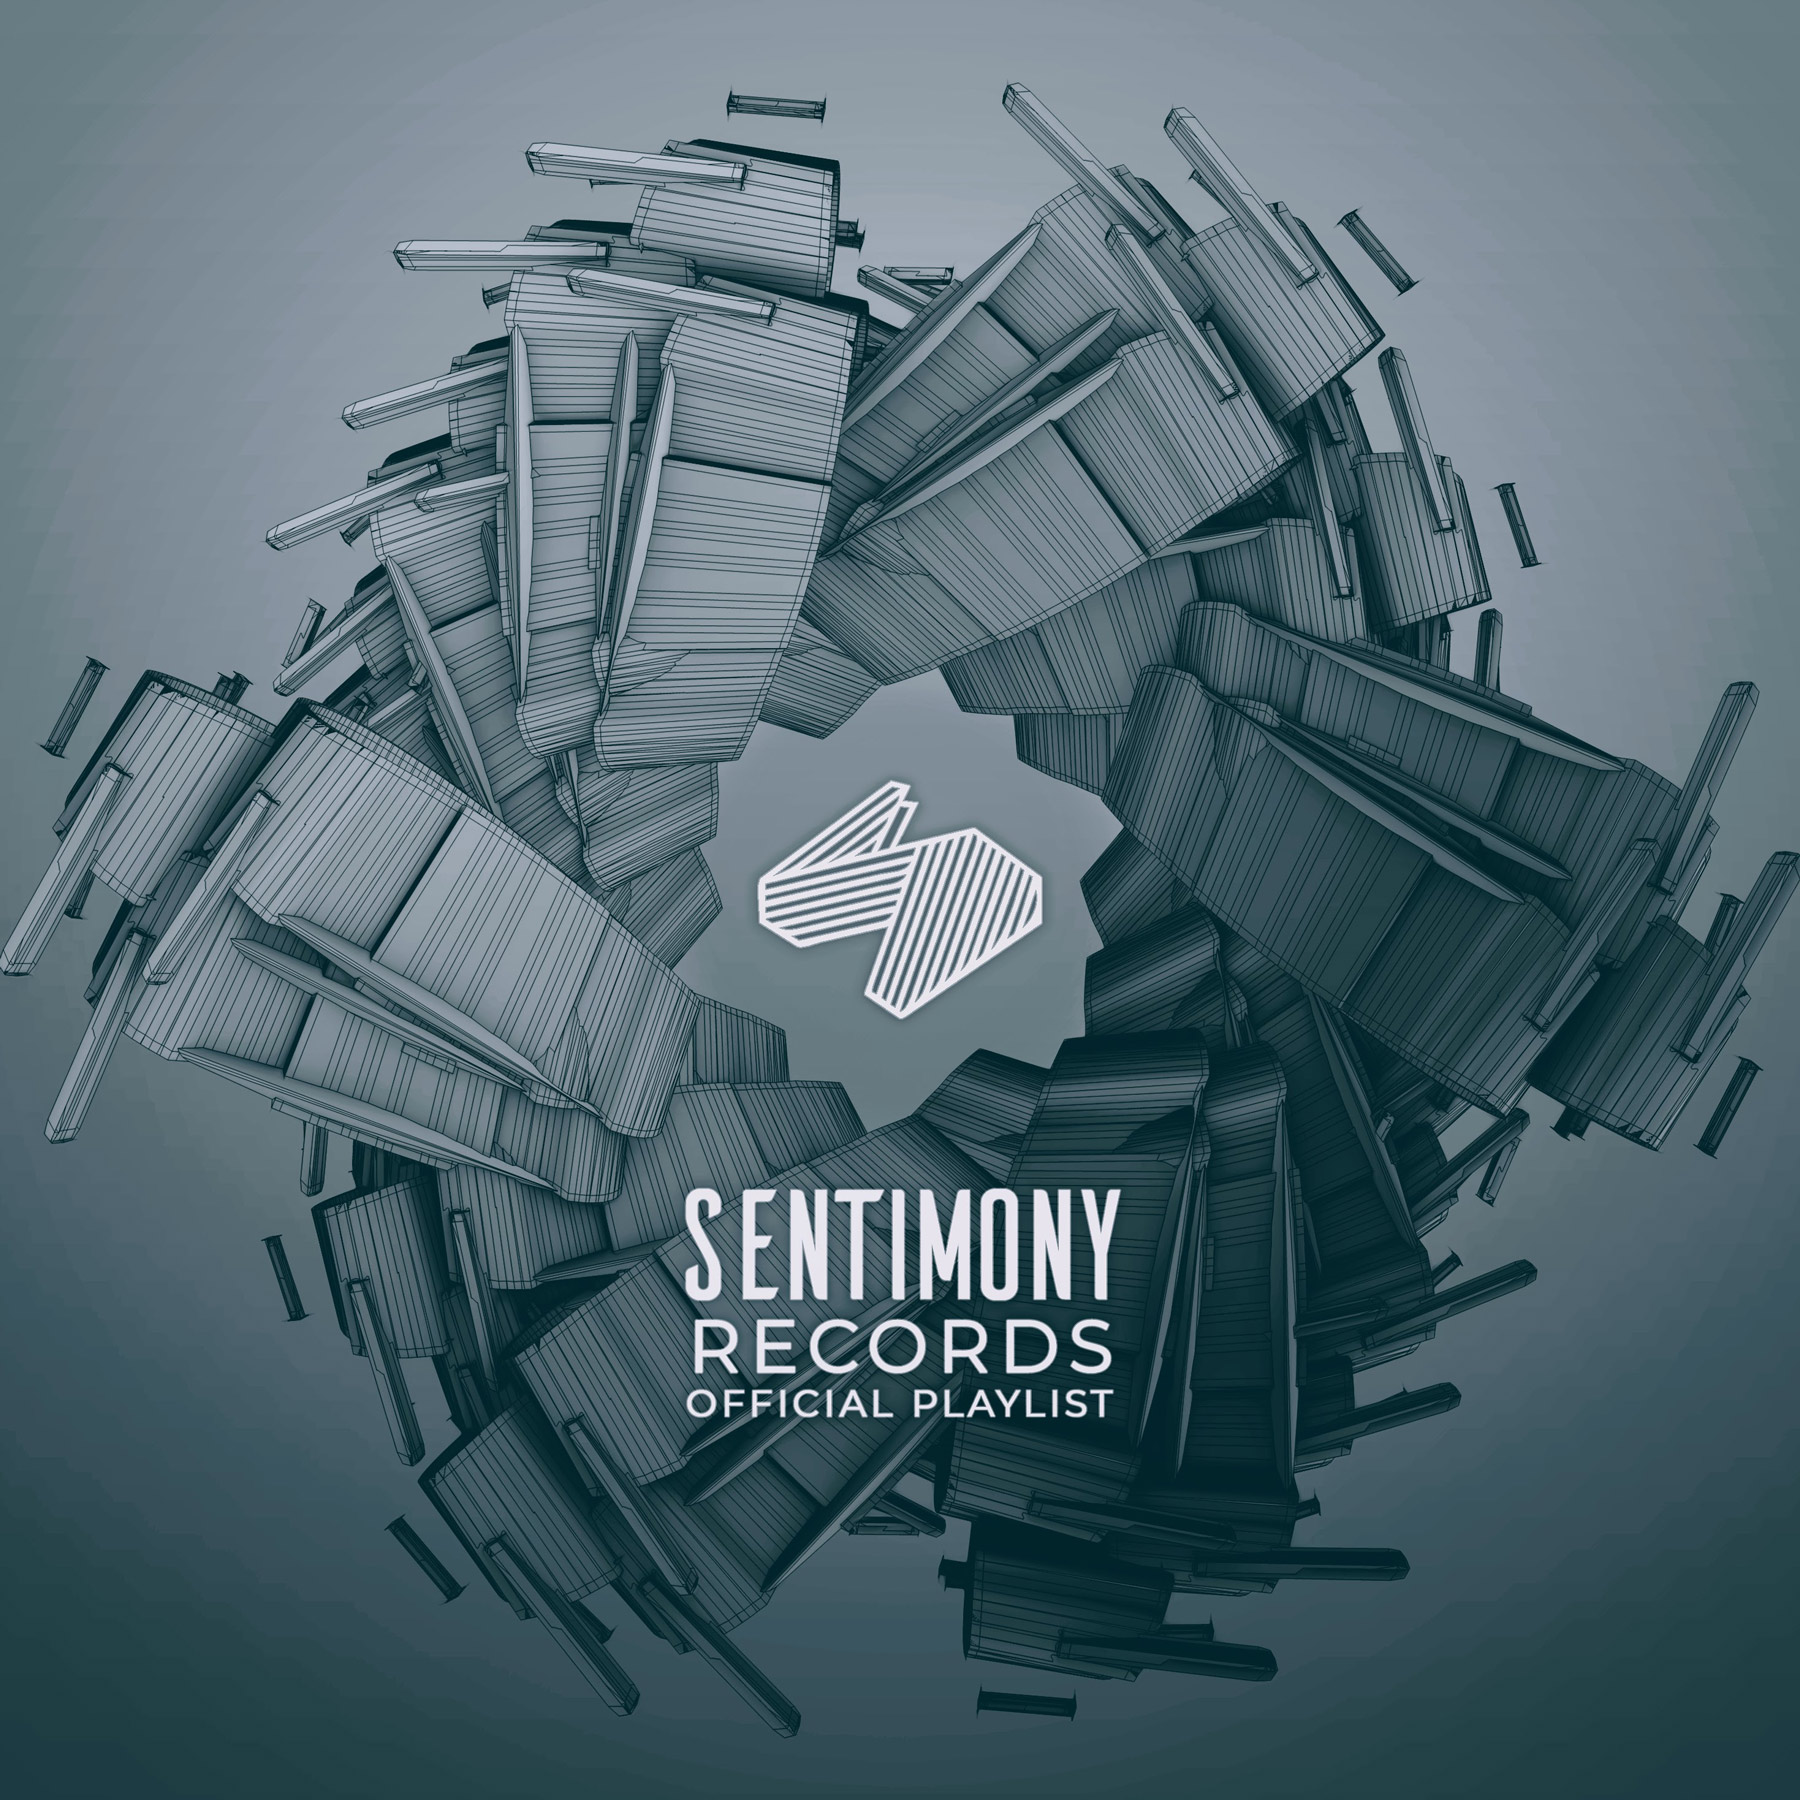 Sentimony Records Official Playlist